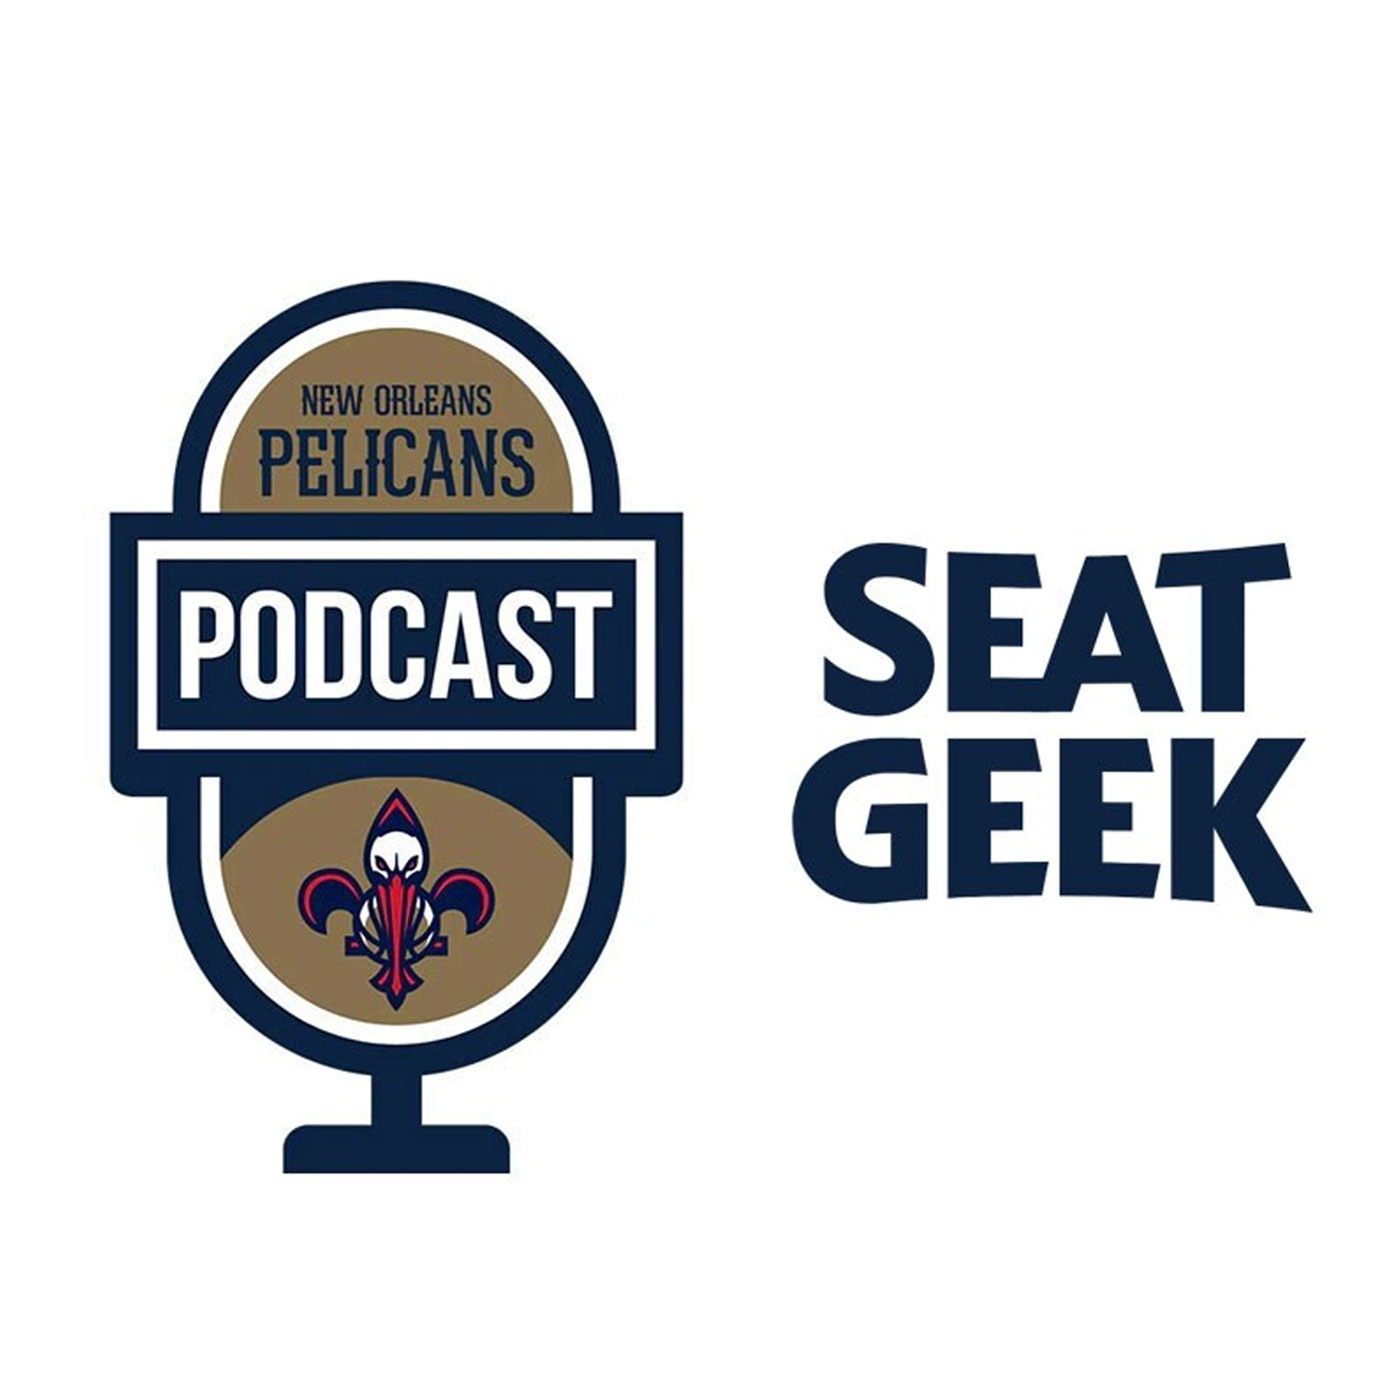 Steve Aschburner on the New Orleans Pelicans Podcast presented by SeatGeek - December 20, 2021